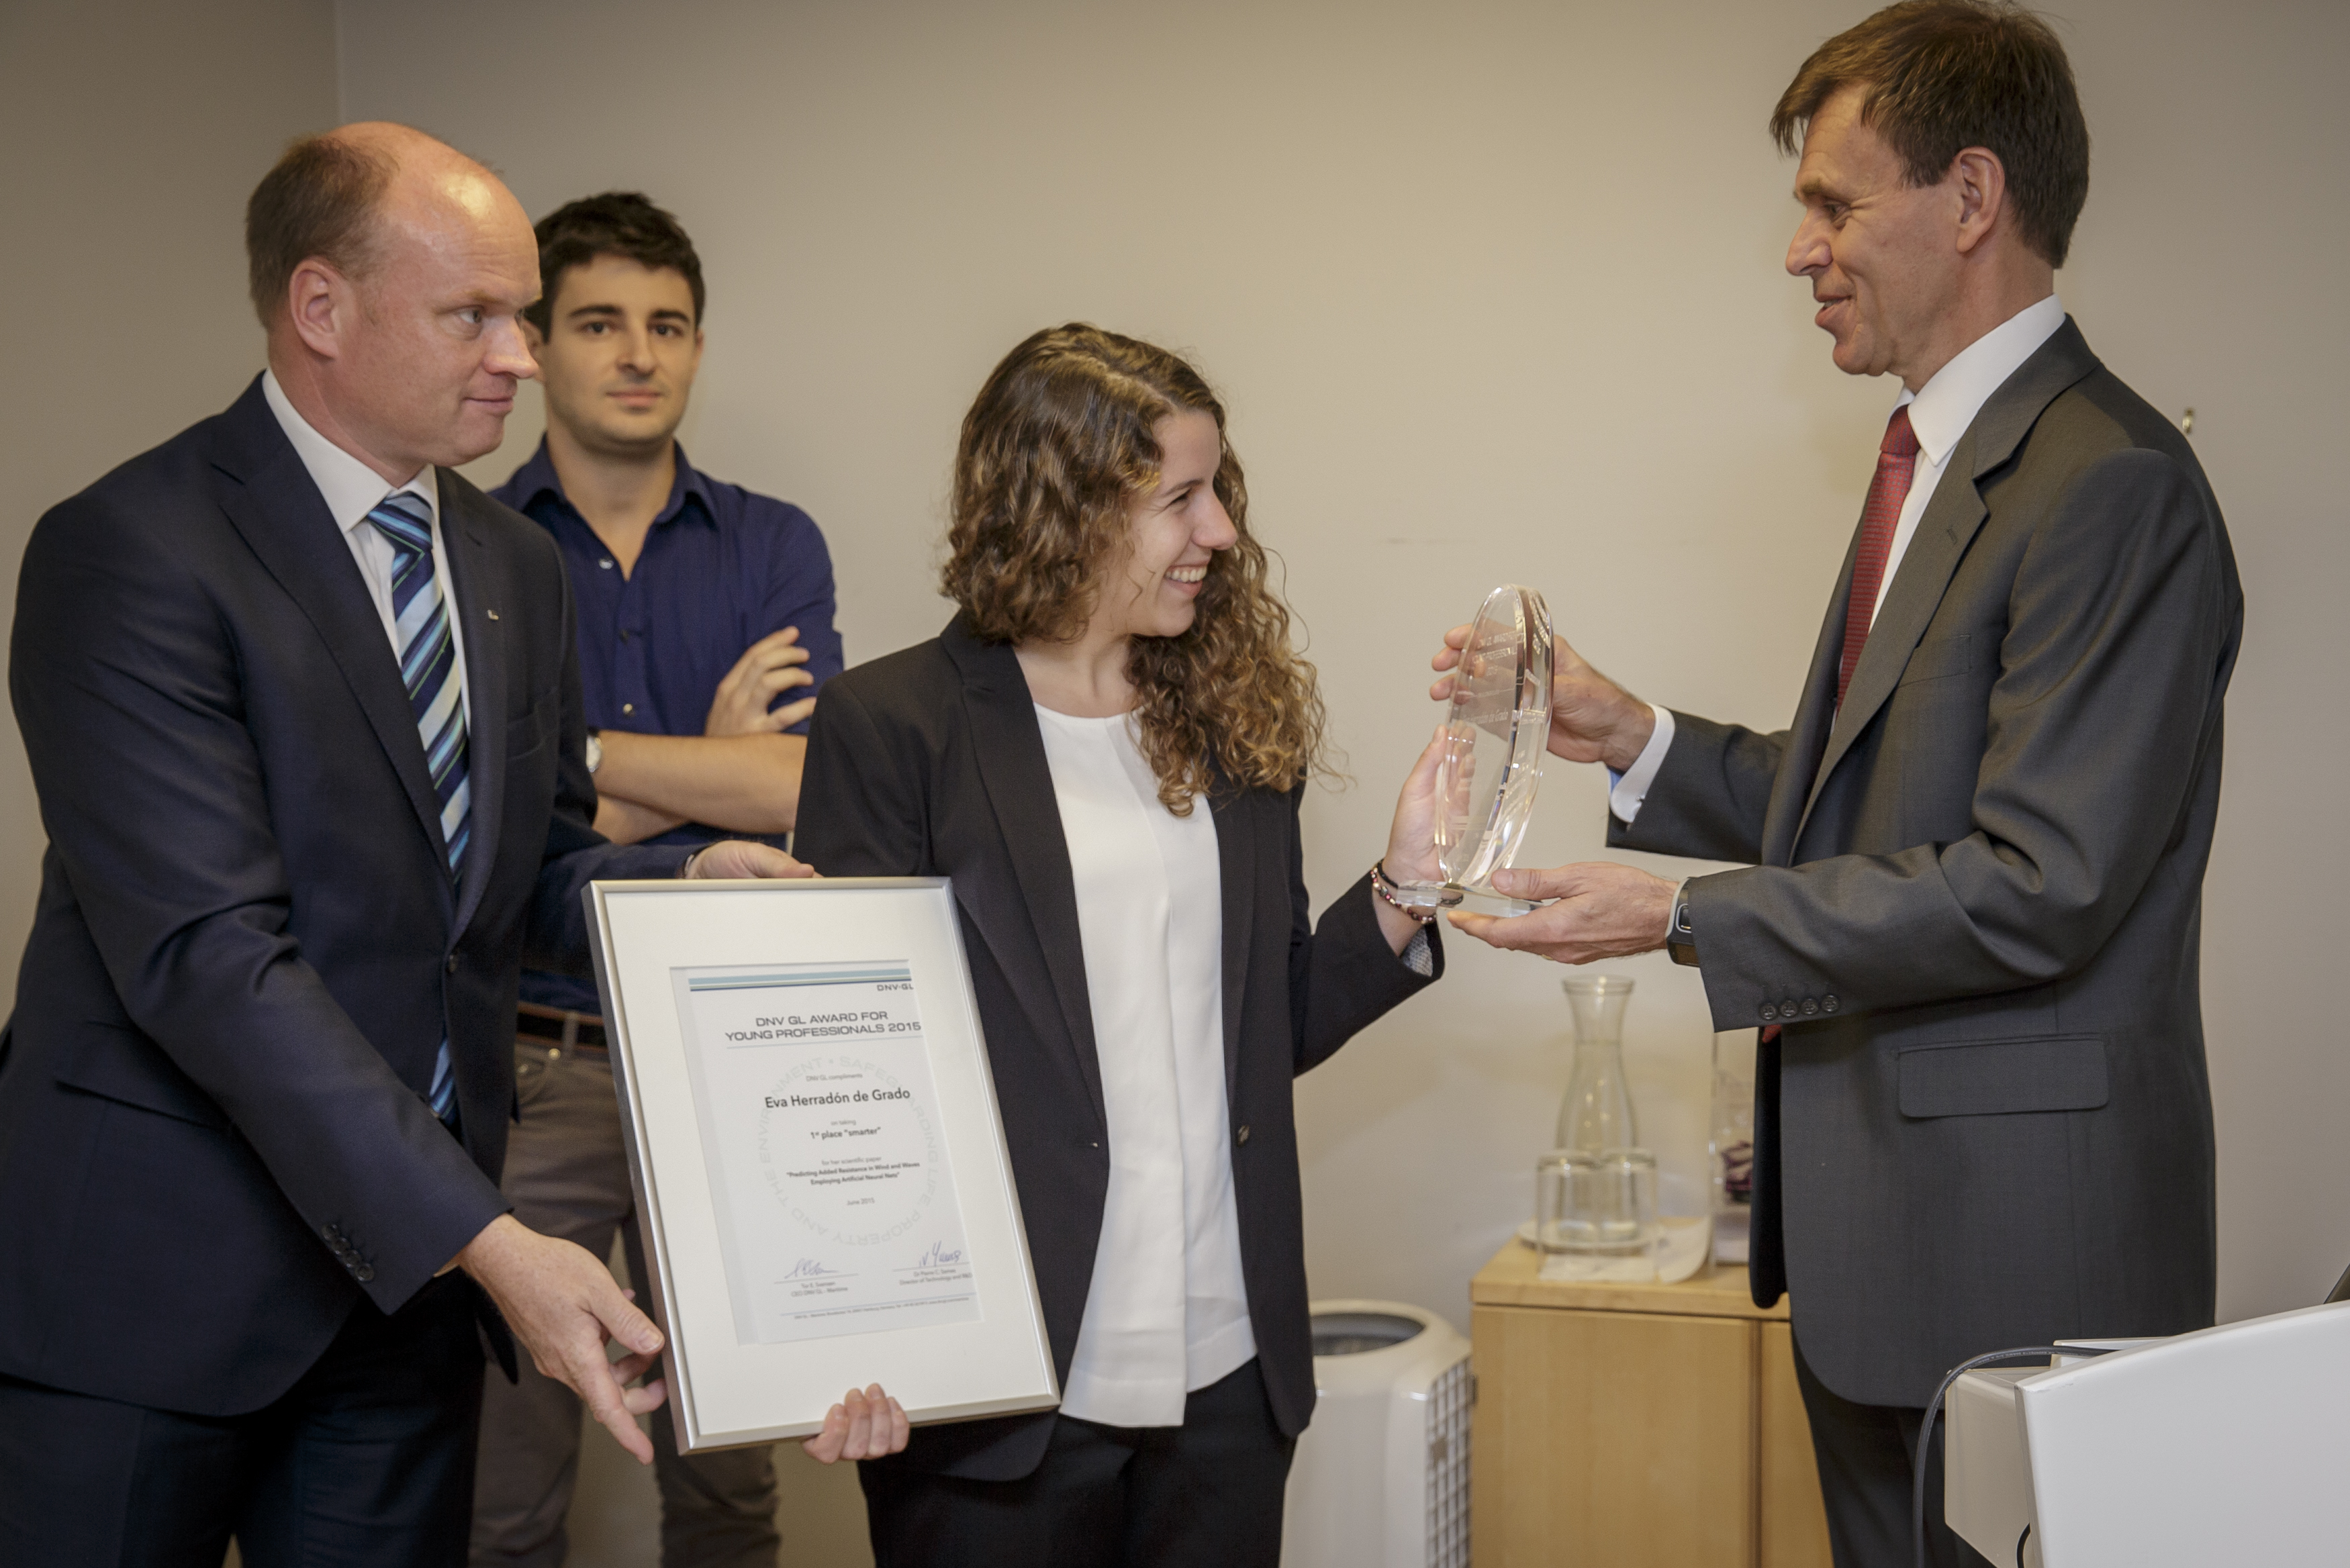 DNV GL Award for Young Professionals